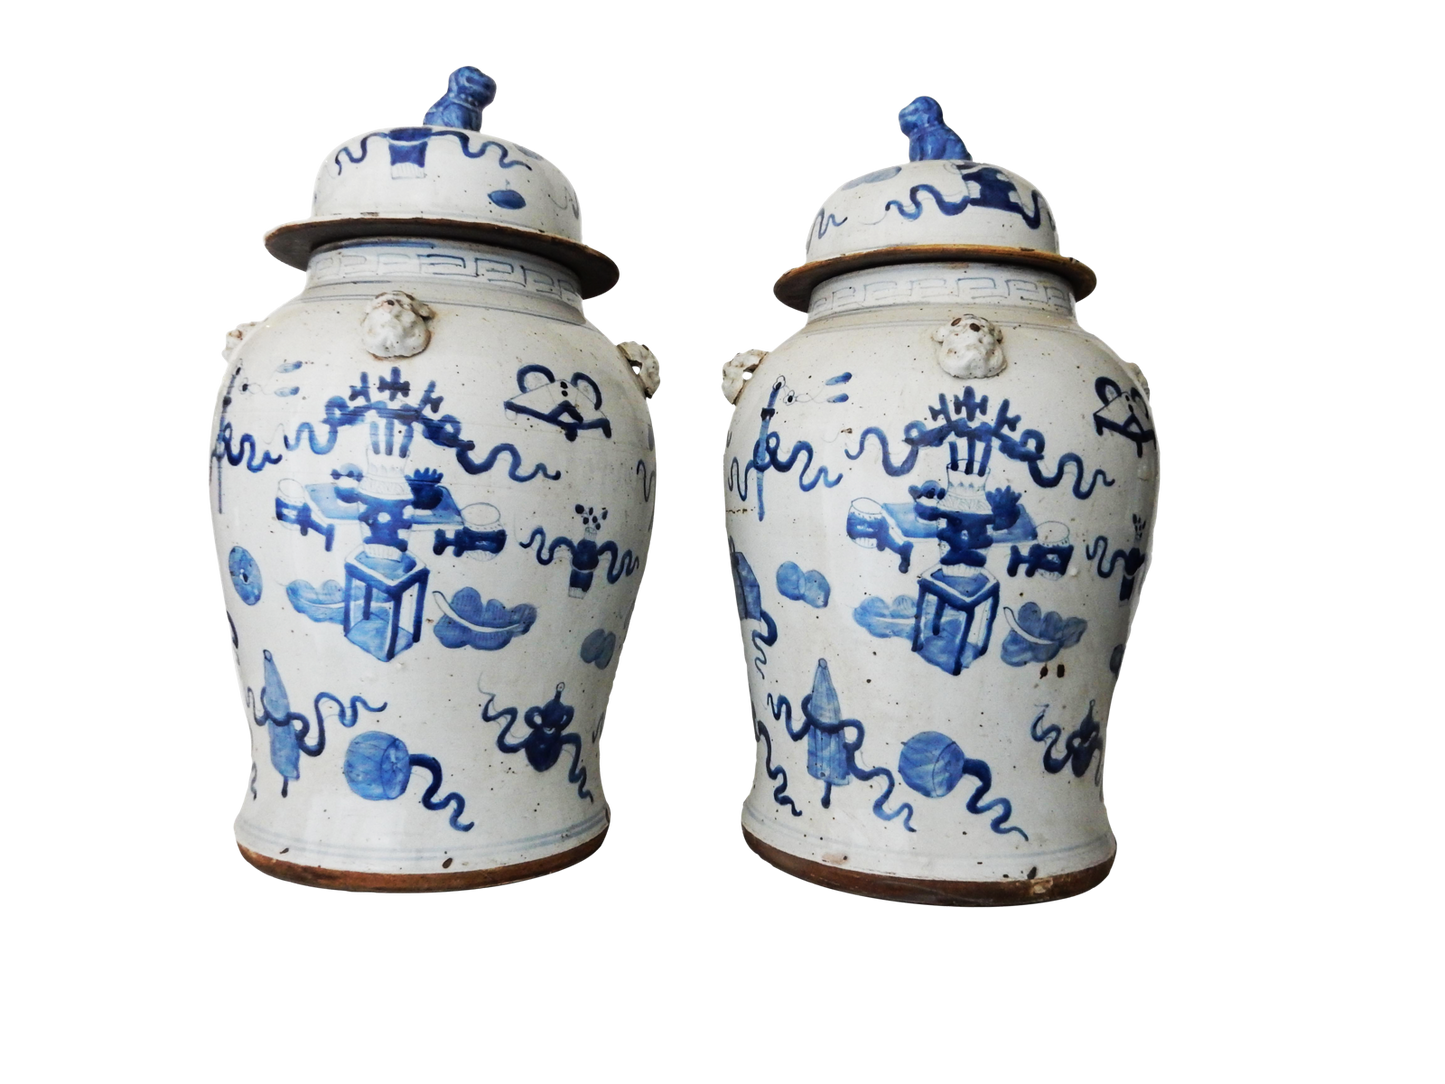 #143 Superb Large Chinoiserie Blue & White Ginger Jars - a Pair 23" H